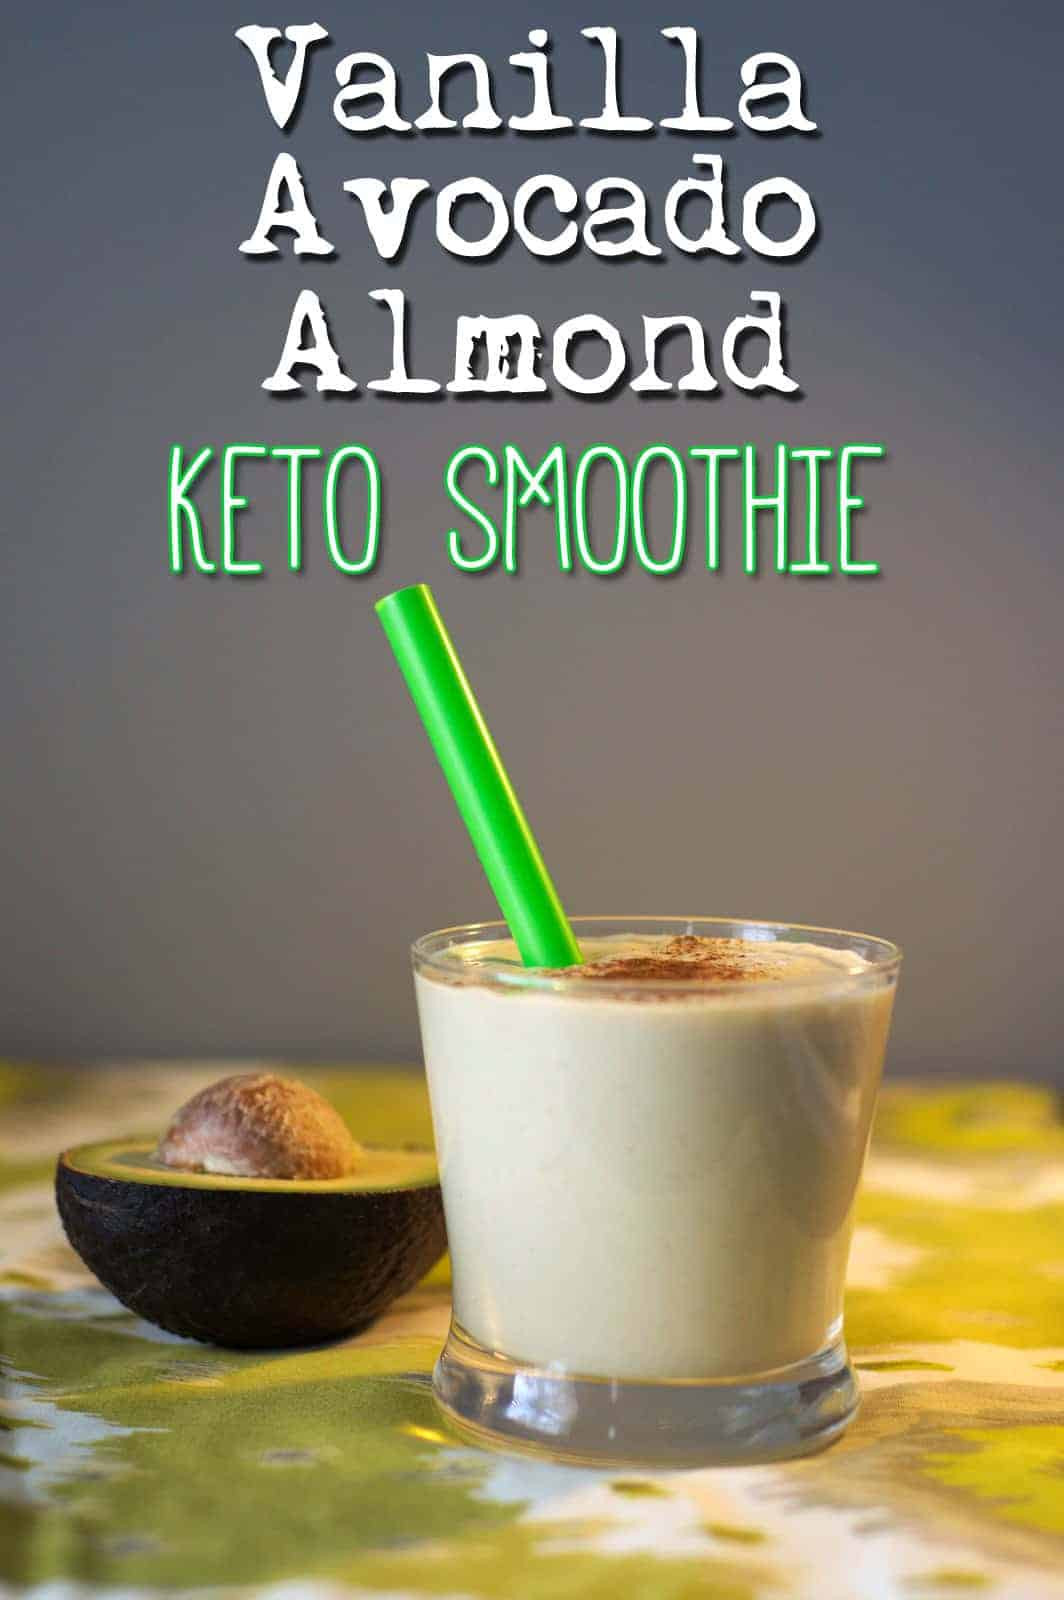 Keto Breakfast Smoothie Almond Milk
 50 Best Low Carb Smoothie Recipes for 2016